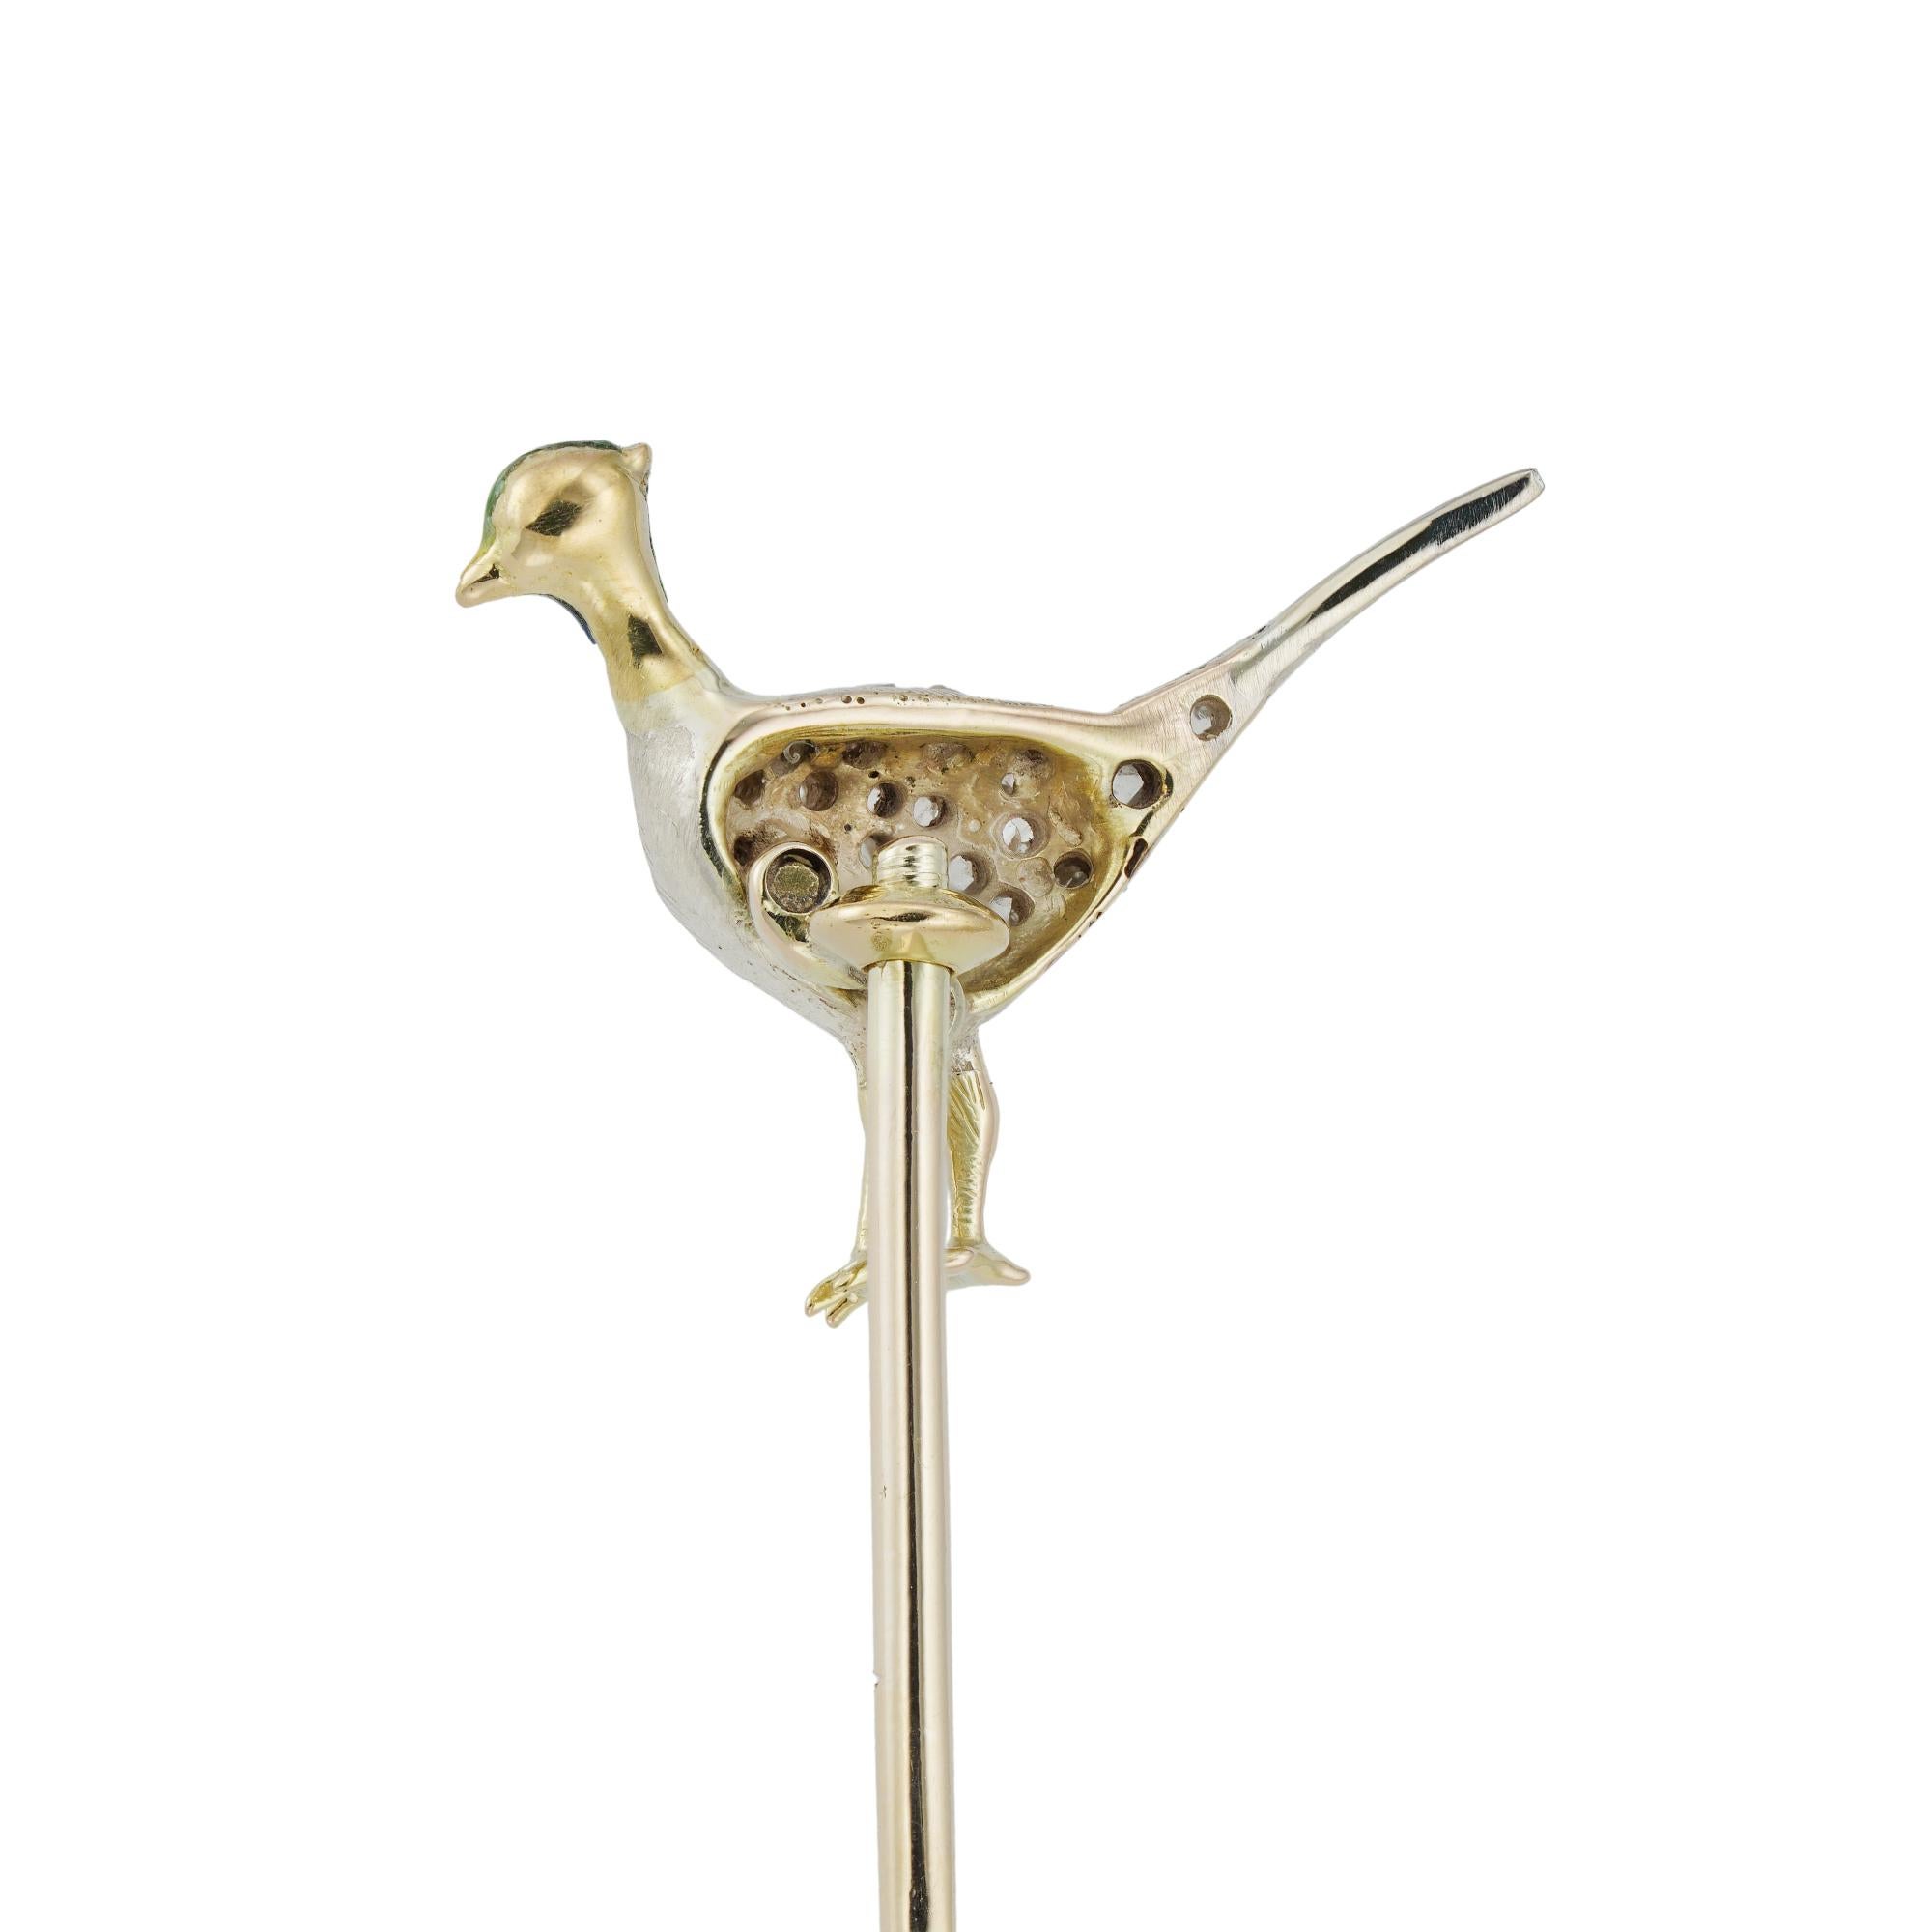 A Victorian diamond and enamel pheasant stick pin, the head of the pin depicting a pheasant with rose-cut diamonds set to silver and an enamelled head, total diamond weight approximately 0.15 carats, the pheasant measuring 16.9 x 10mm, set to an